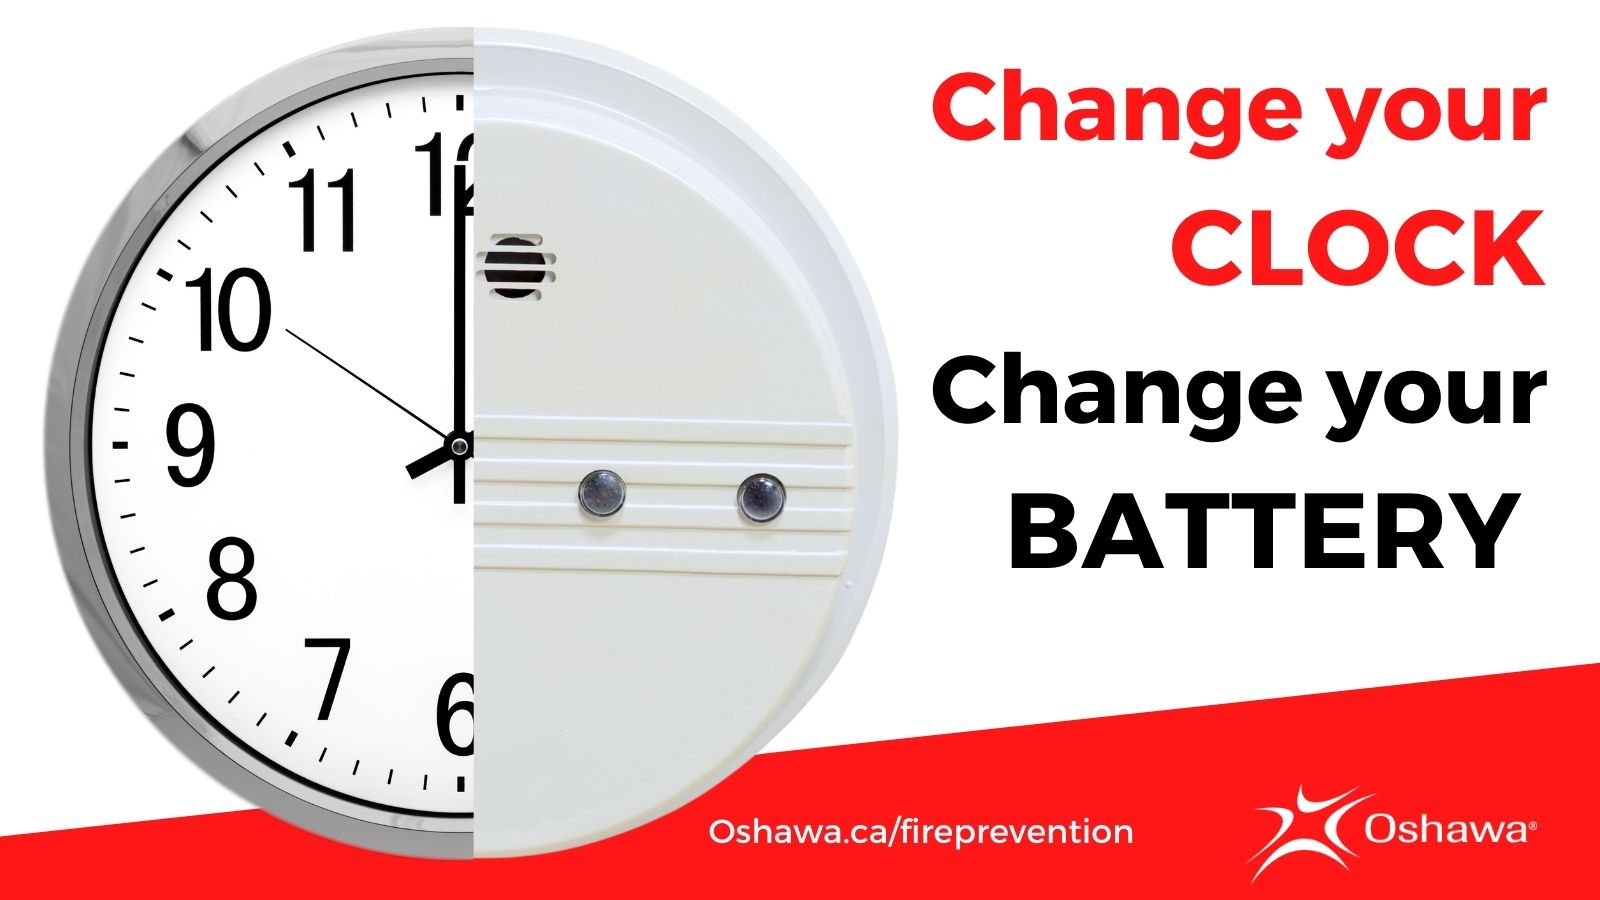 Daylight saving time. Change your batteries